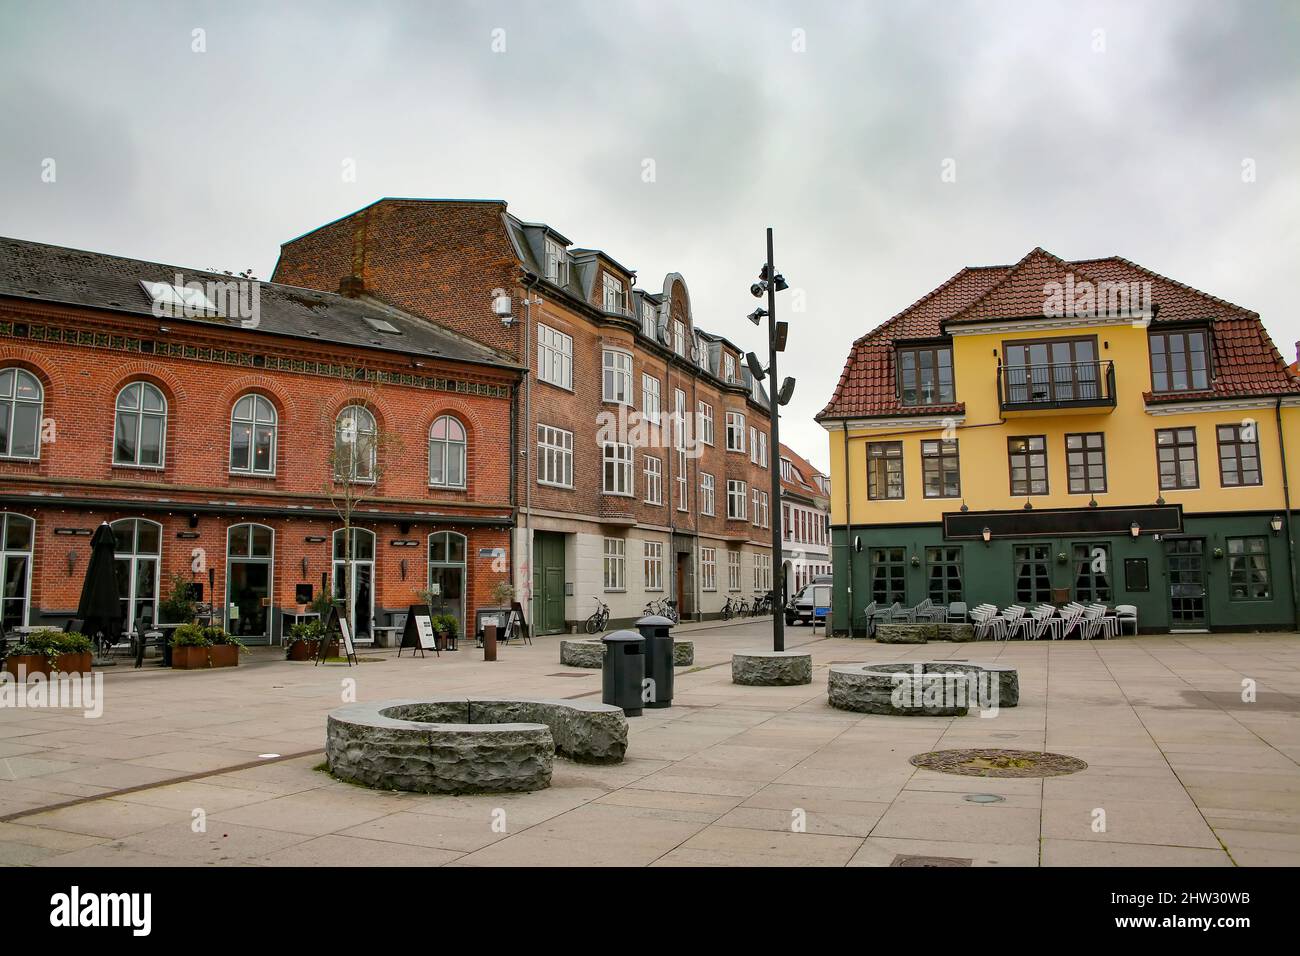 Historic buildings including shops, bars and restaurants surrounding Toldbod Plads square which is located in the heart of Aalborg, Denmark. Stock Photo